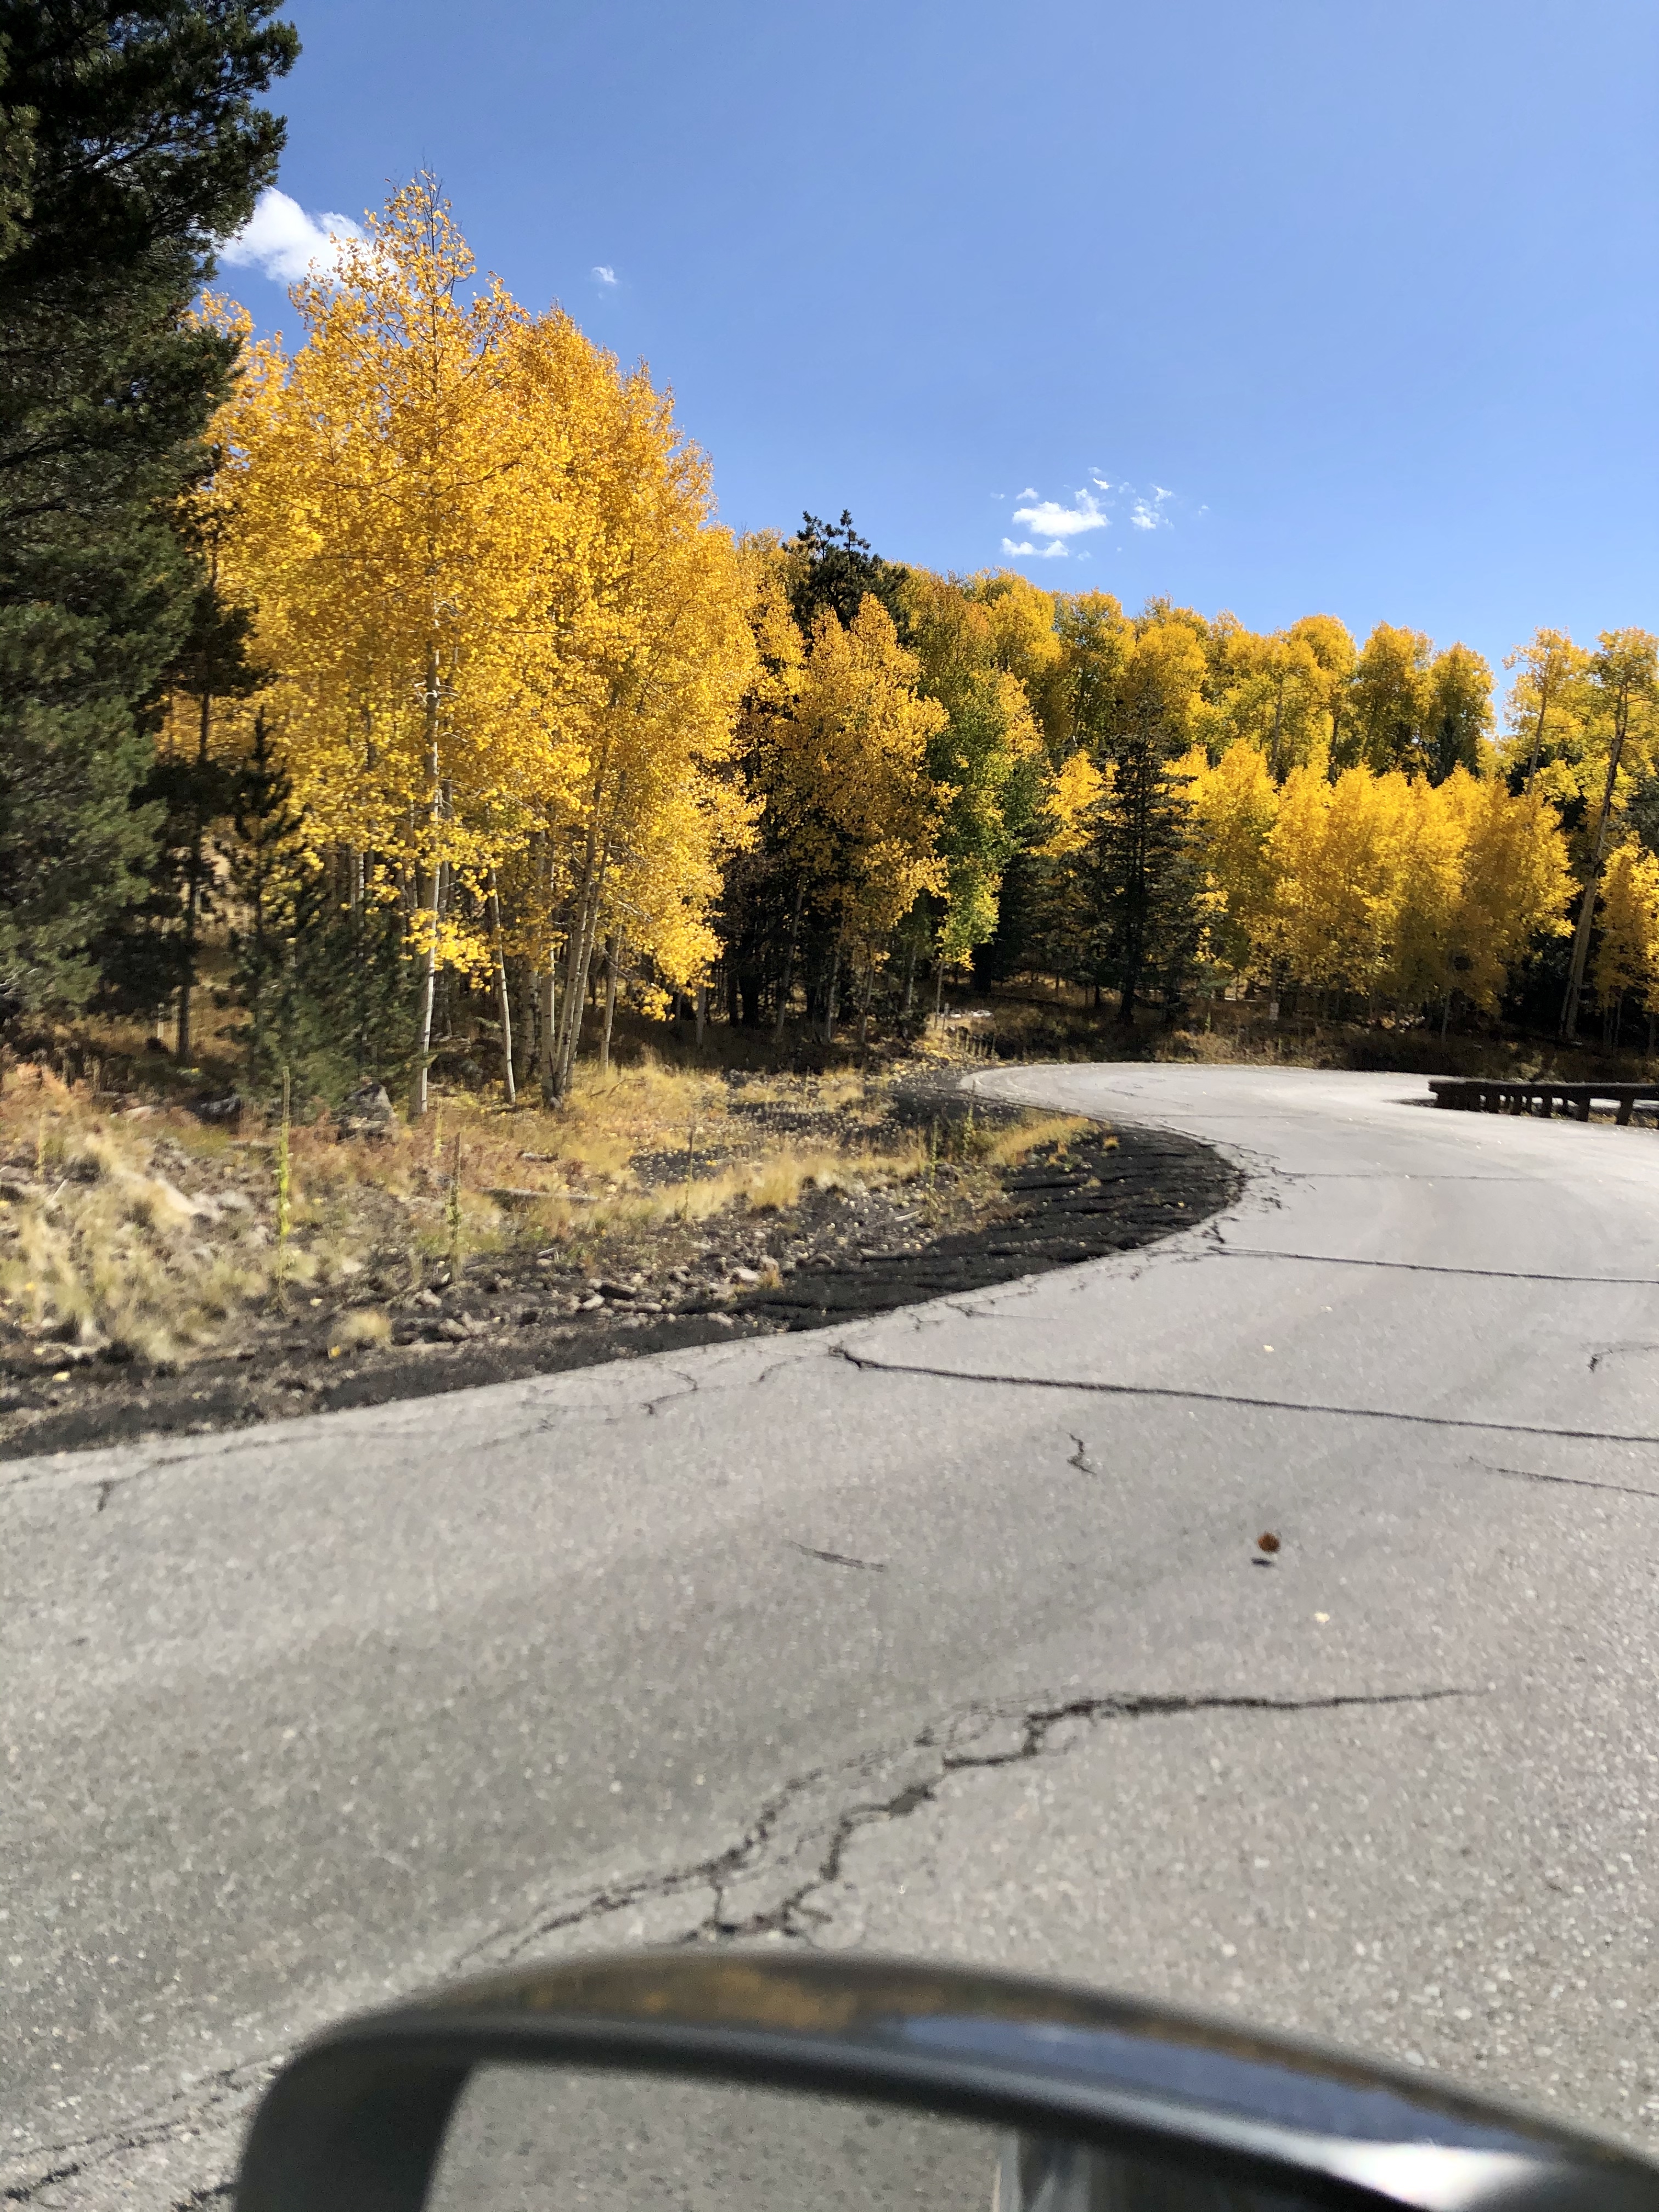 Road to snowbowl with aspens